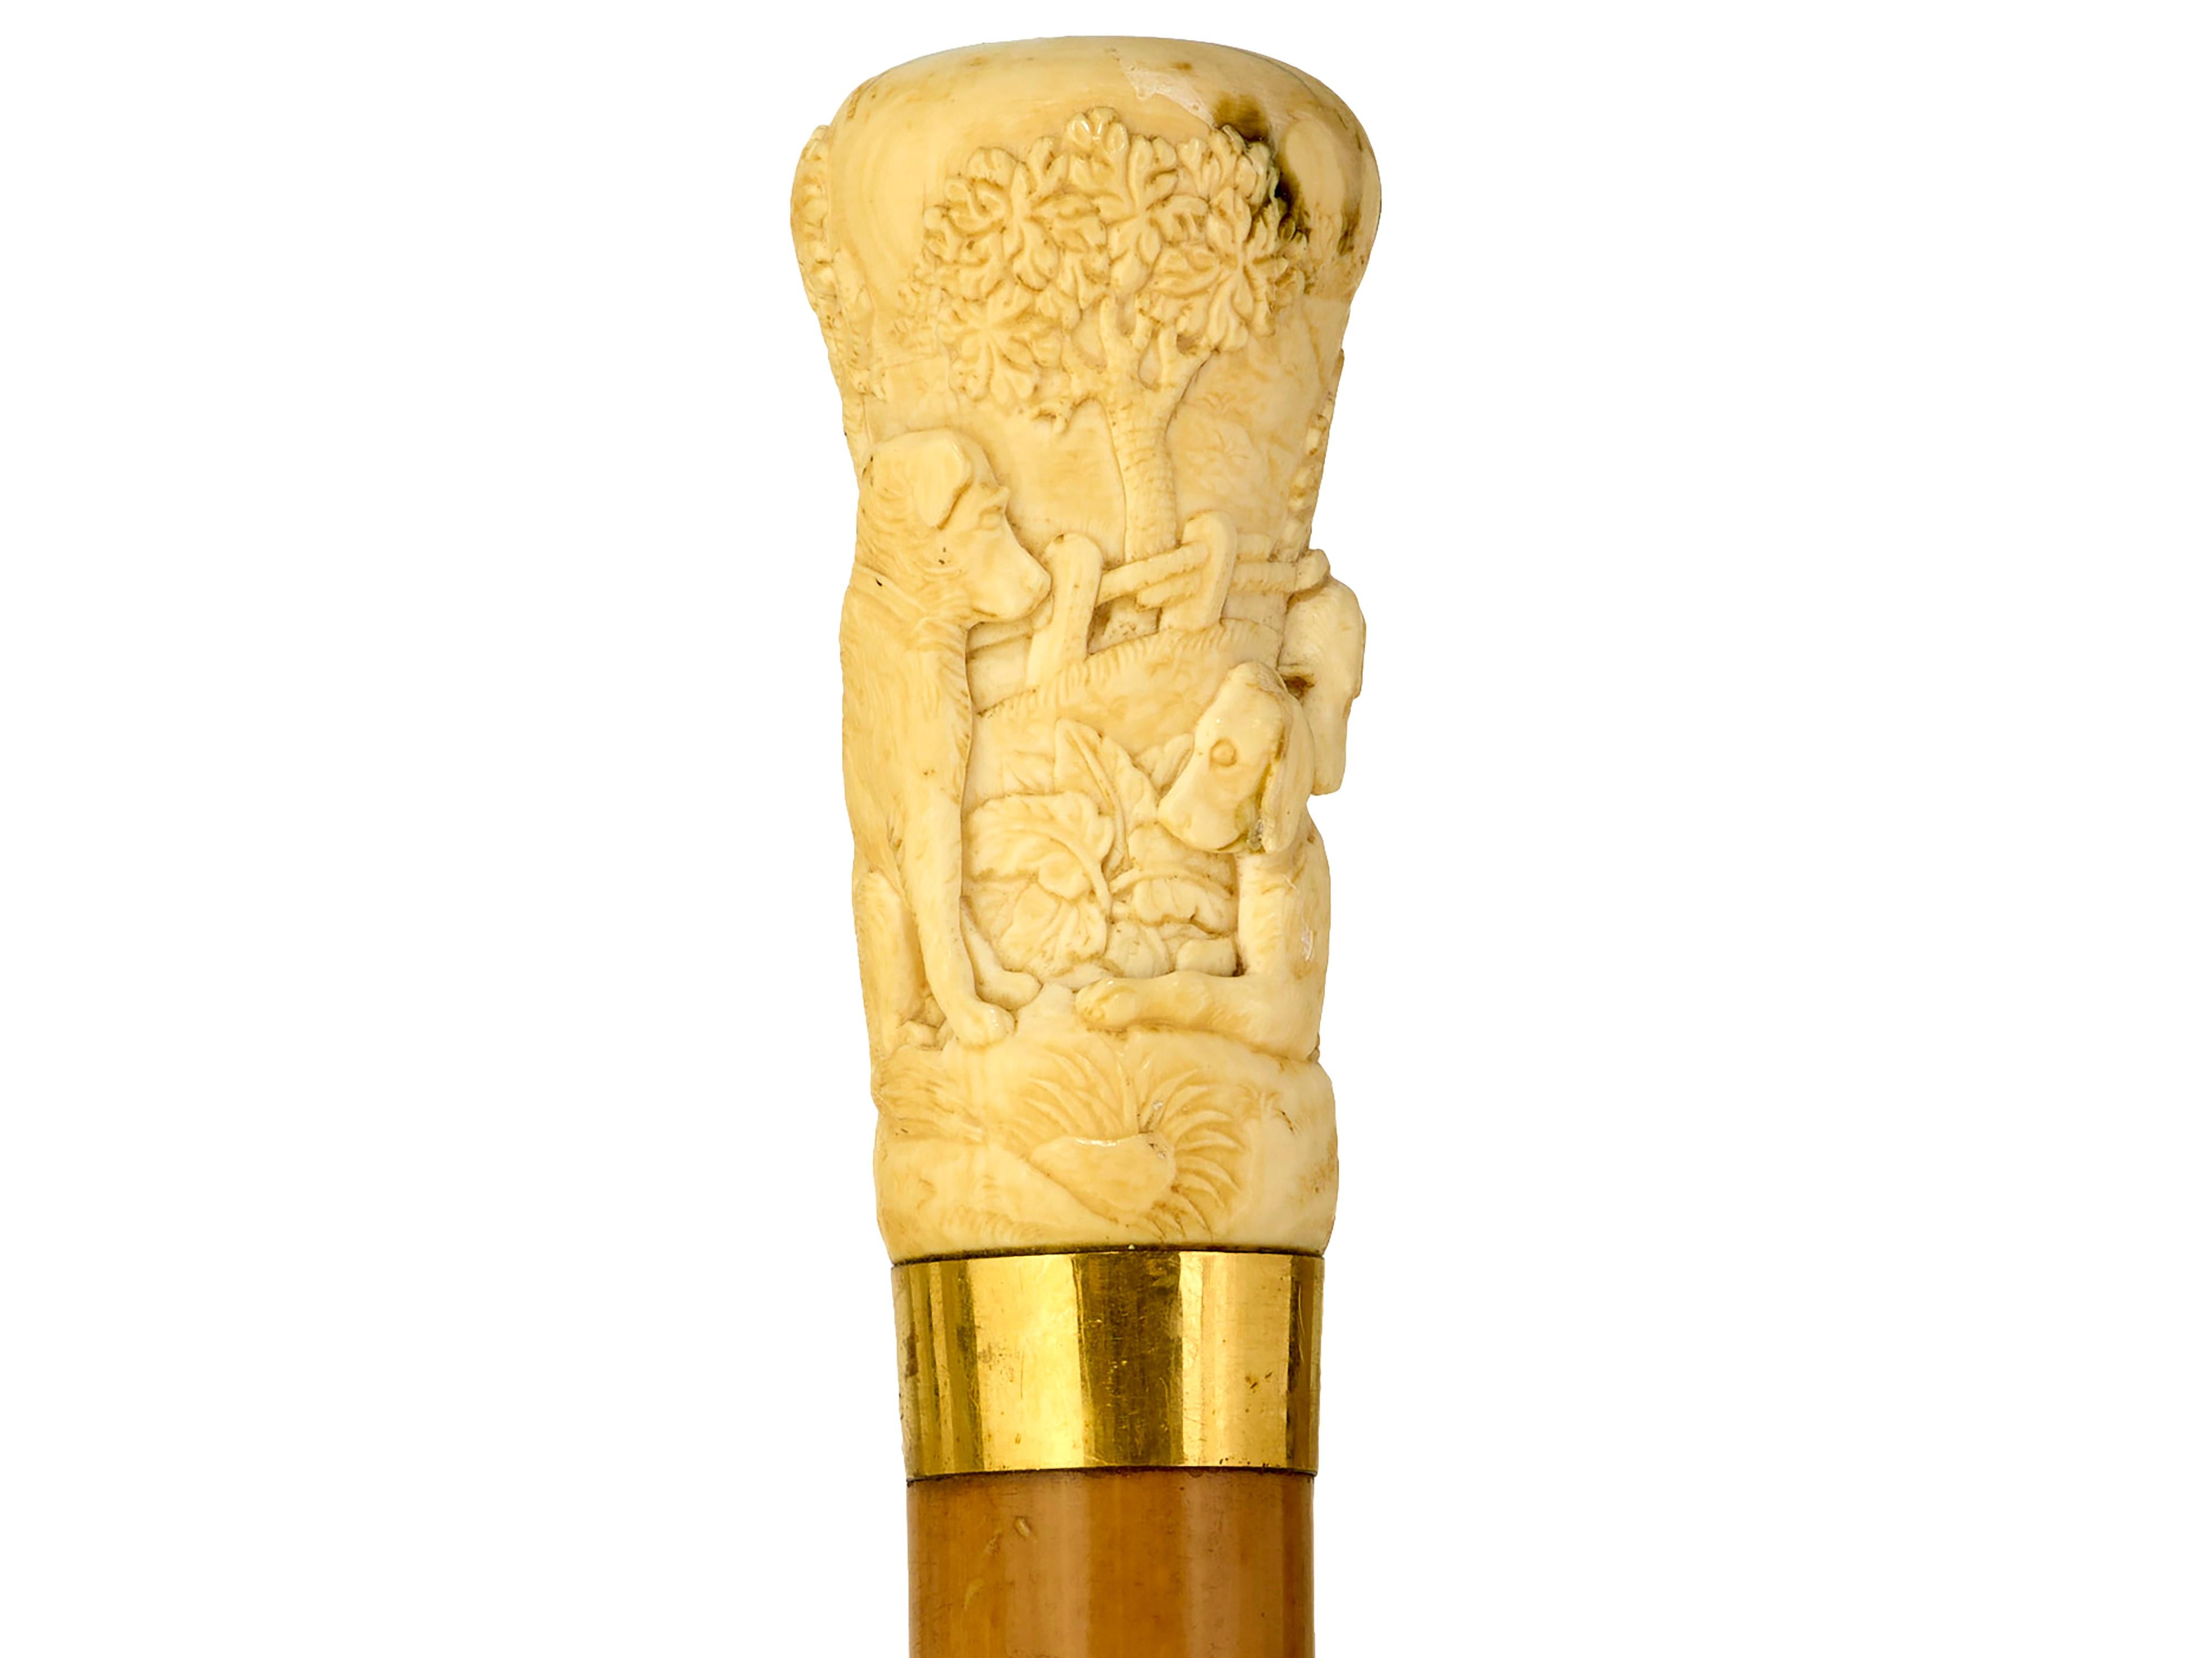 Umbrella with carved hunting hounds
Gold coloured collar marked Briggs. Ivory top finely carved with four hunting hounds under trees. Original ferrule and worn umbrella. 
Will be supplied with Ivory Submission Reference No.
L 94cm, round top 3.5cm